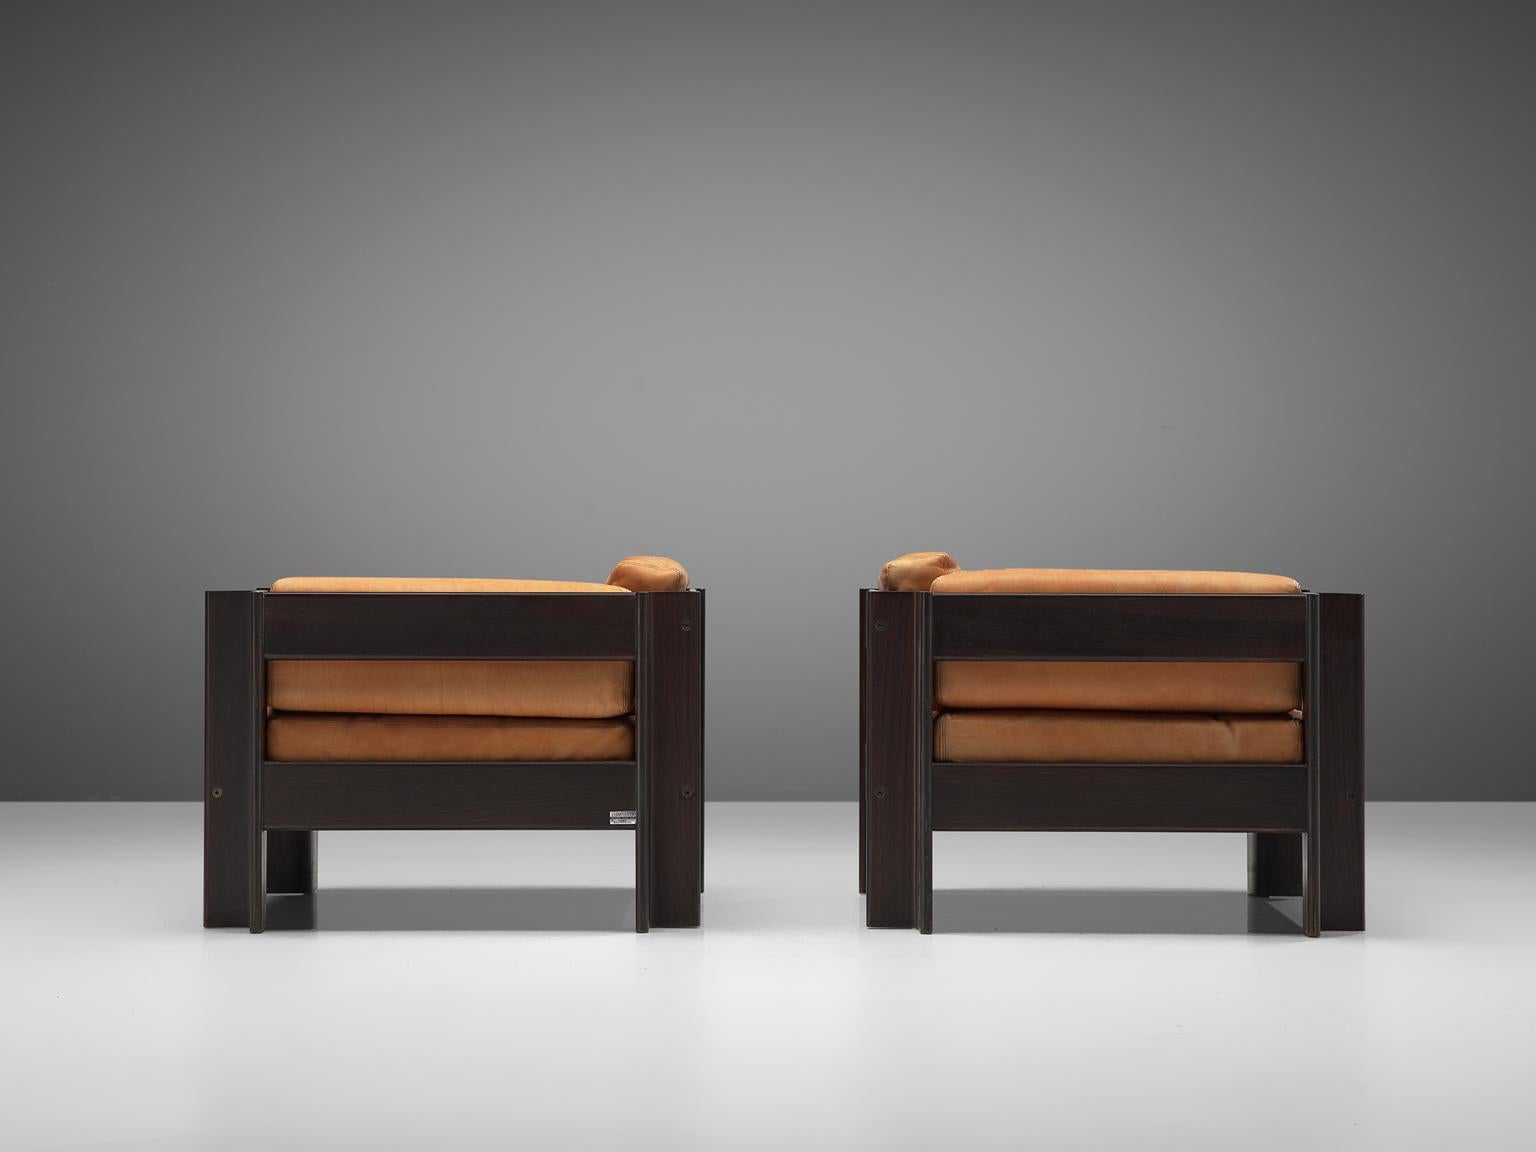 Sergio Asti for Poltronova, 'Zelda' set of lounge chairs, leather and darkened wood, Italy, 1962.

Beautiful pair of lounge chairs designed by Sergio Asti for Poltronova. The chairs are made with a dark wooden frame and terracotta/cognac colored